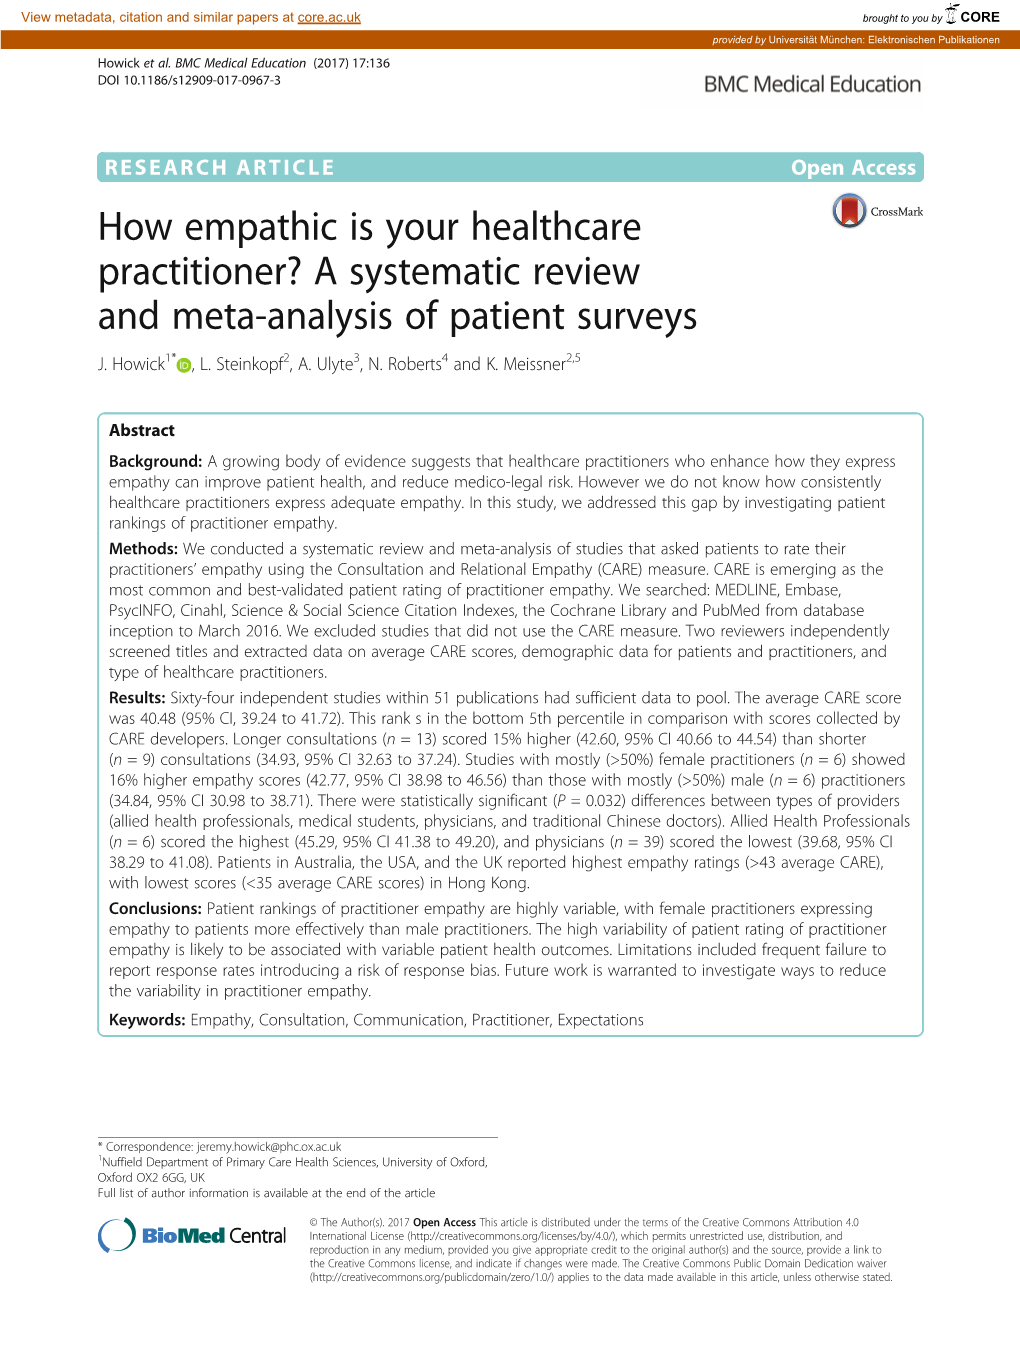 How Empathic Is Your Healthcare Practitioner? a Systematic Review and Meta-Analysis of Patient Surveys J